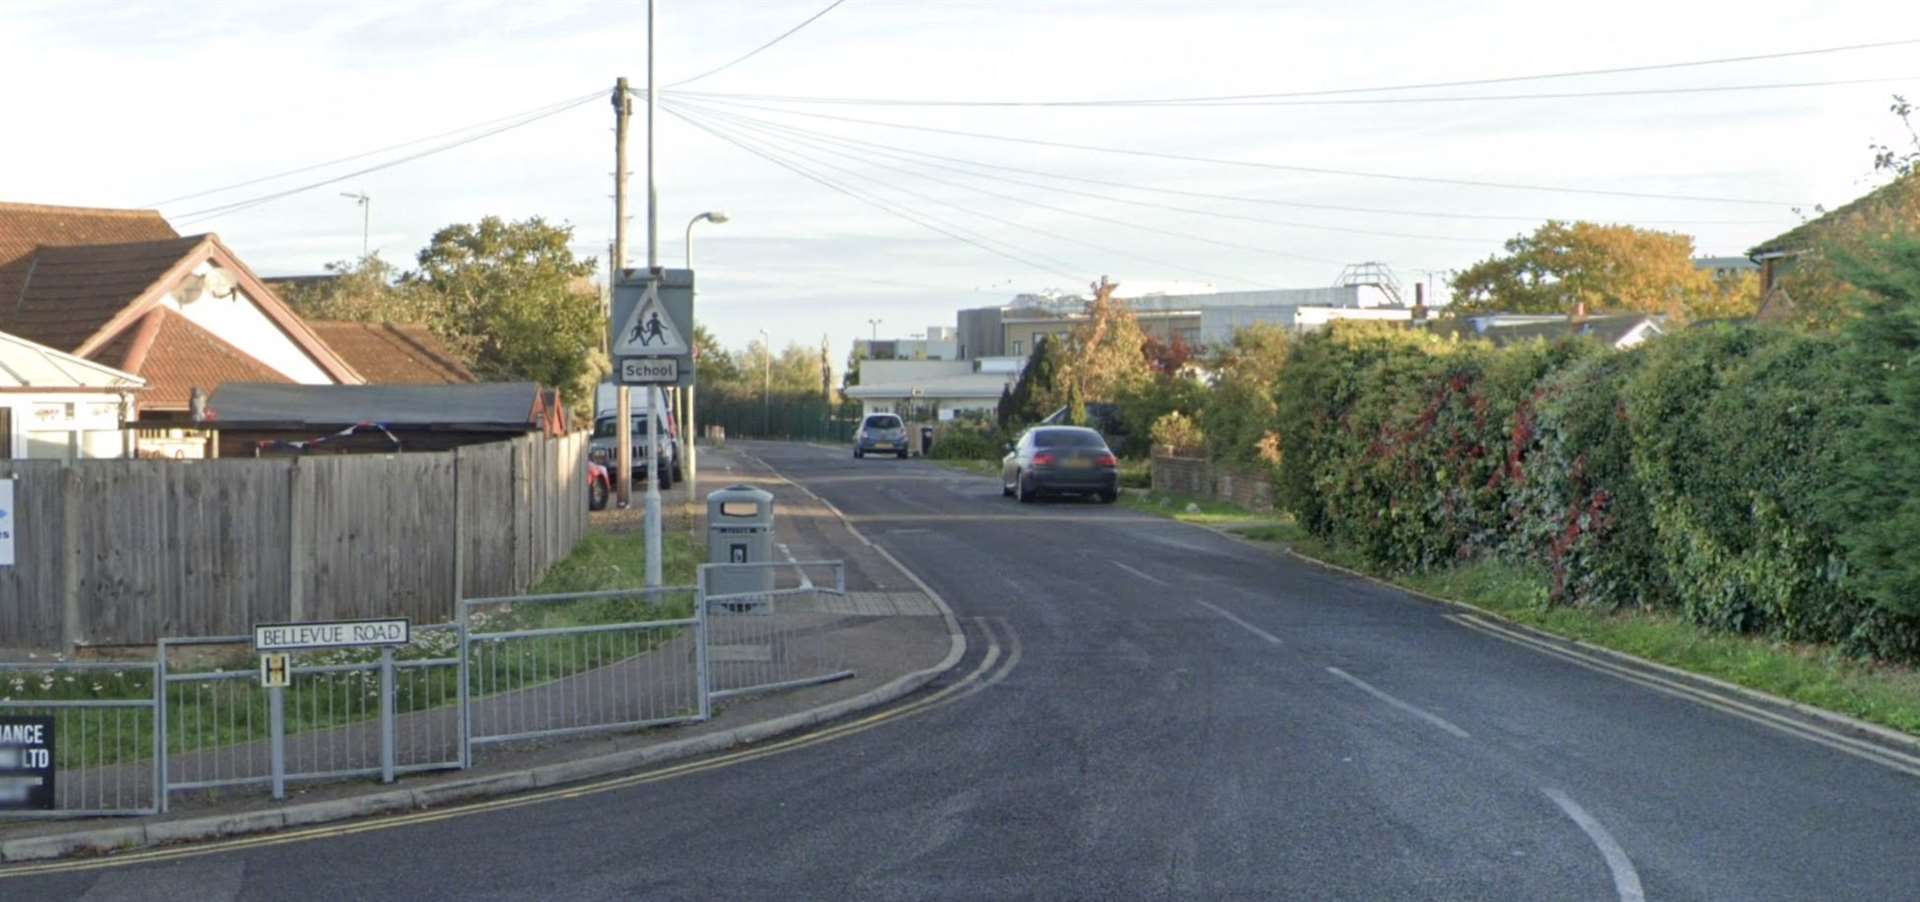 An explosive device was found near a school this morning. Picture: Google